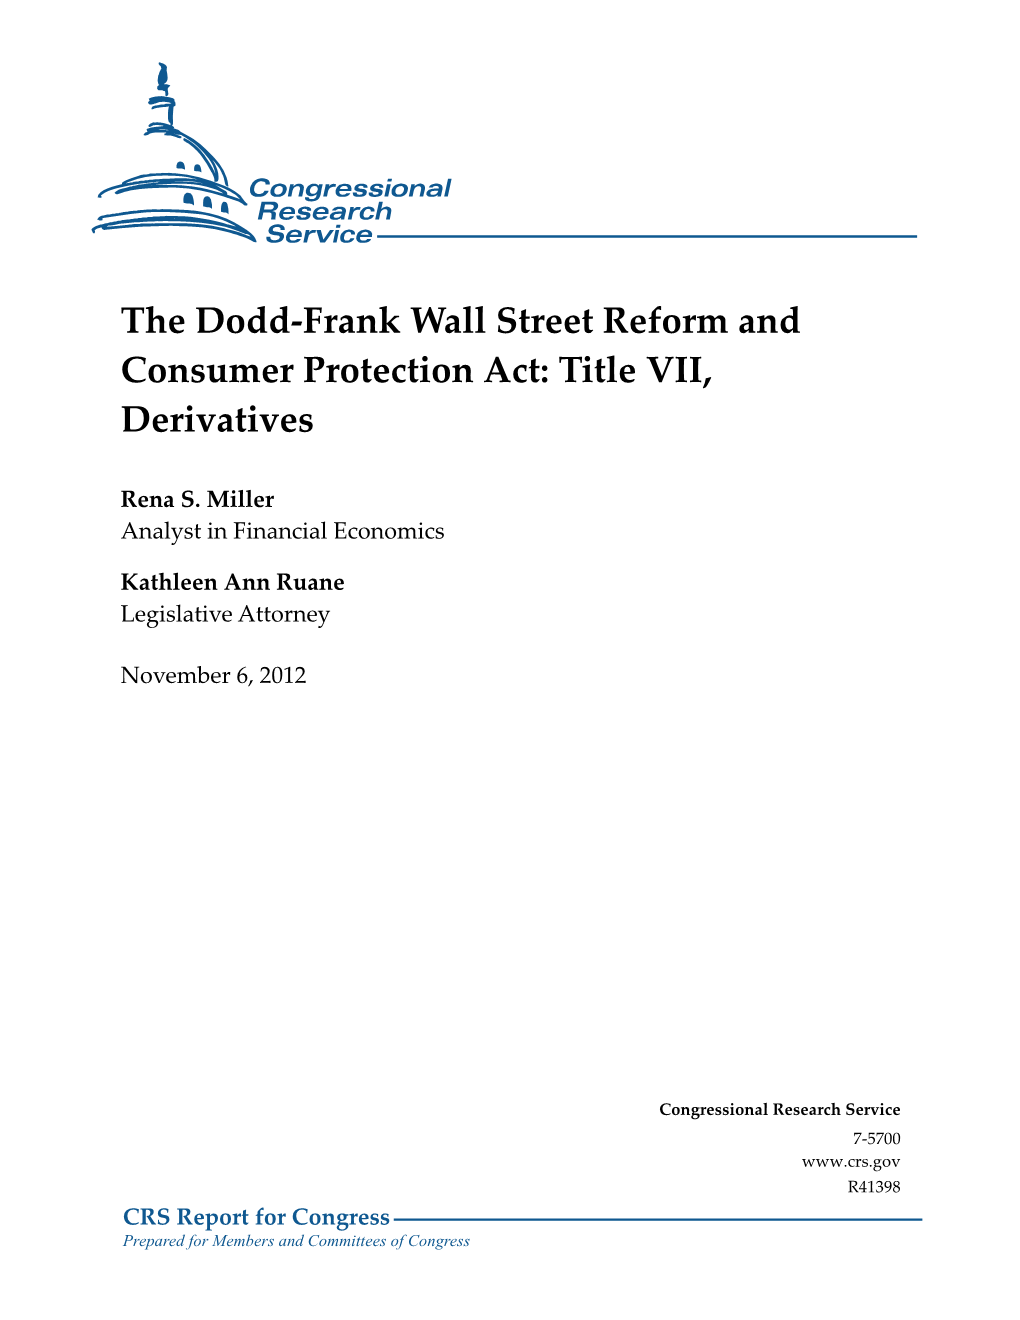 The Dodd-Frank Wall Street Reform and Consumer Protection Act: Title VII, Derivatives